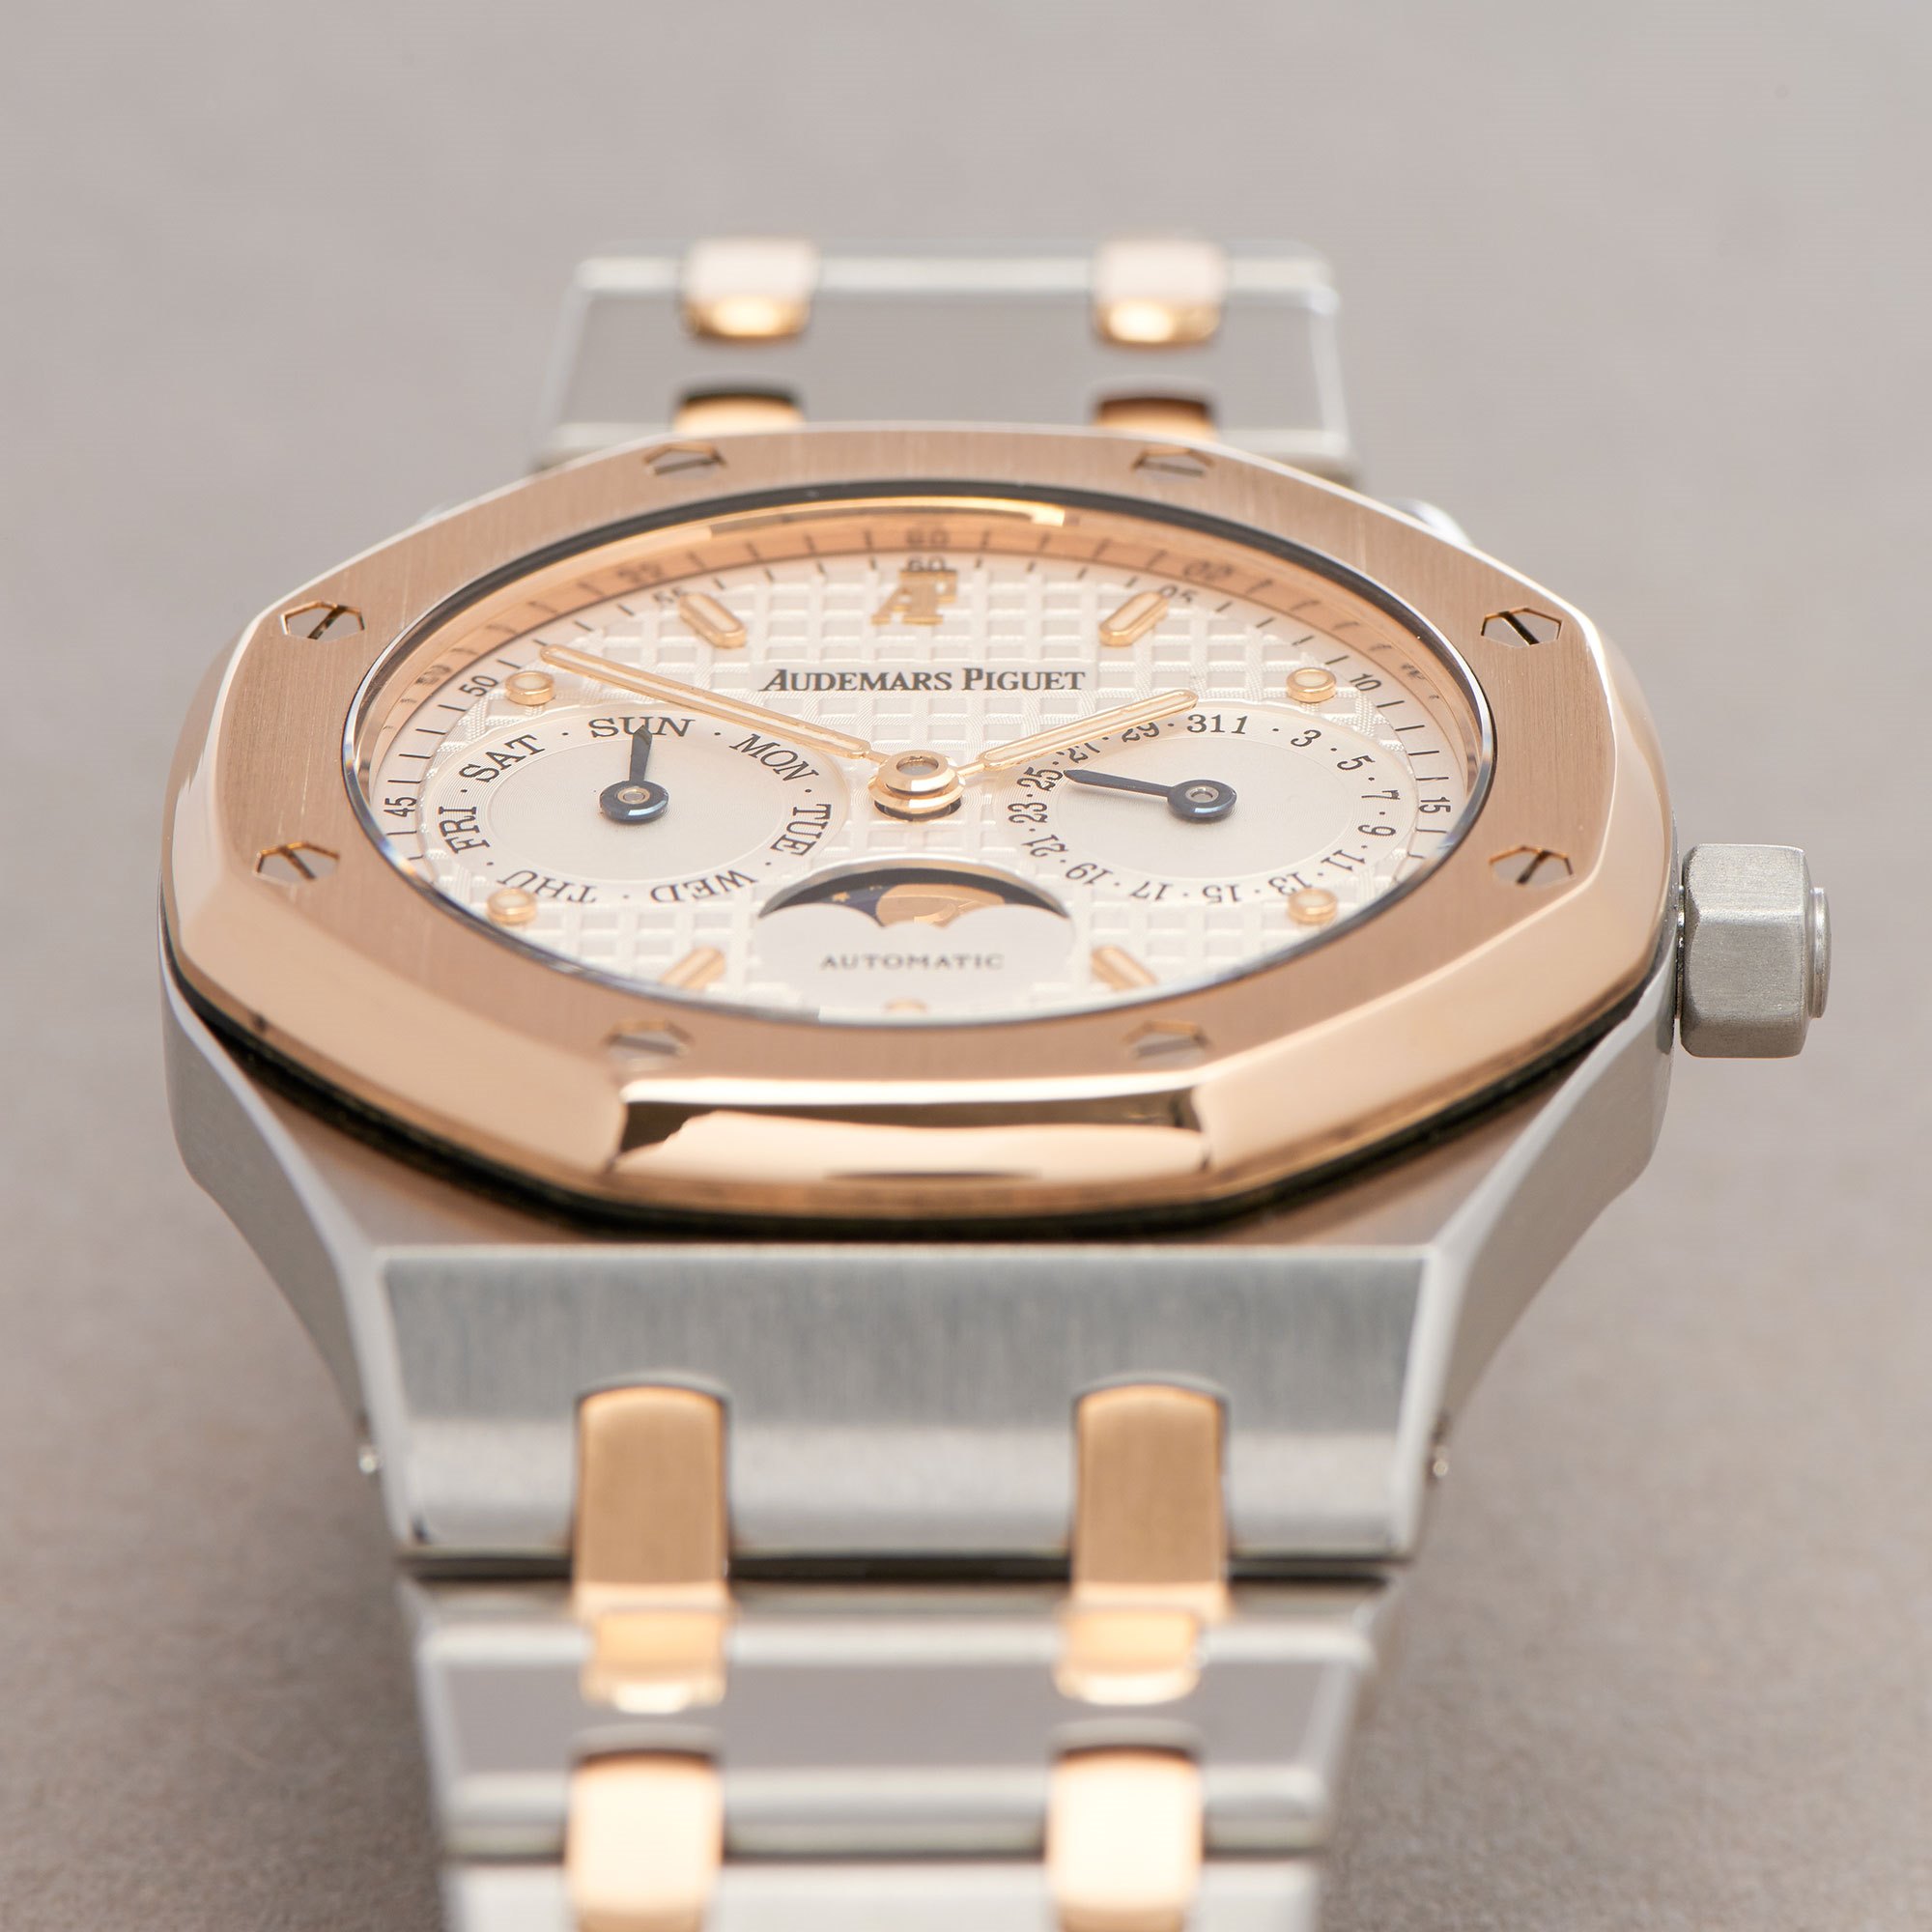 Audemars Piguet Royal Oak Day-Date 18K Yellow Gold & Stainless Steel Watch 25594SA.OO.0789SA.06 - Image 8 of 10